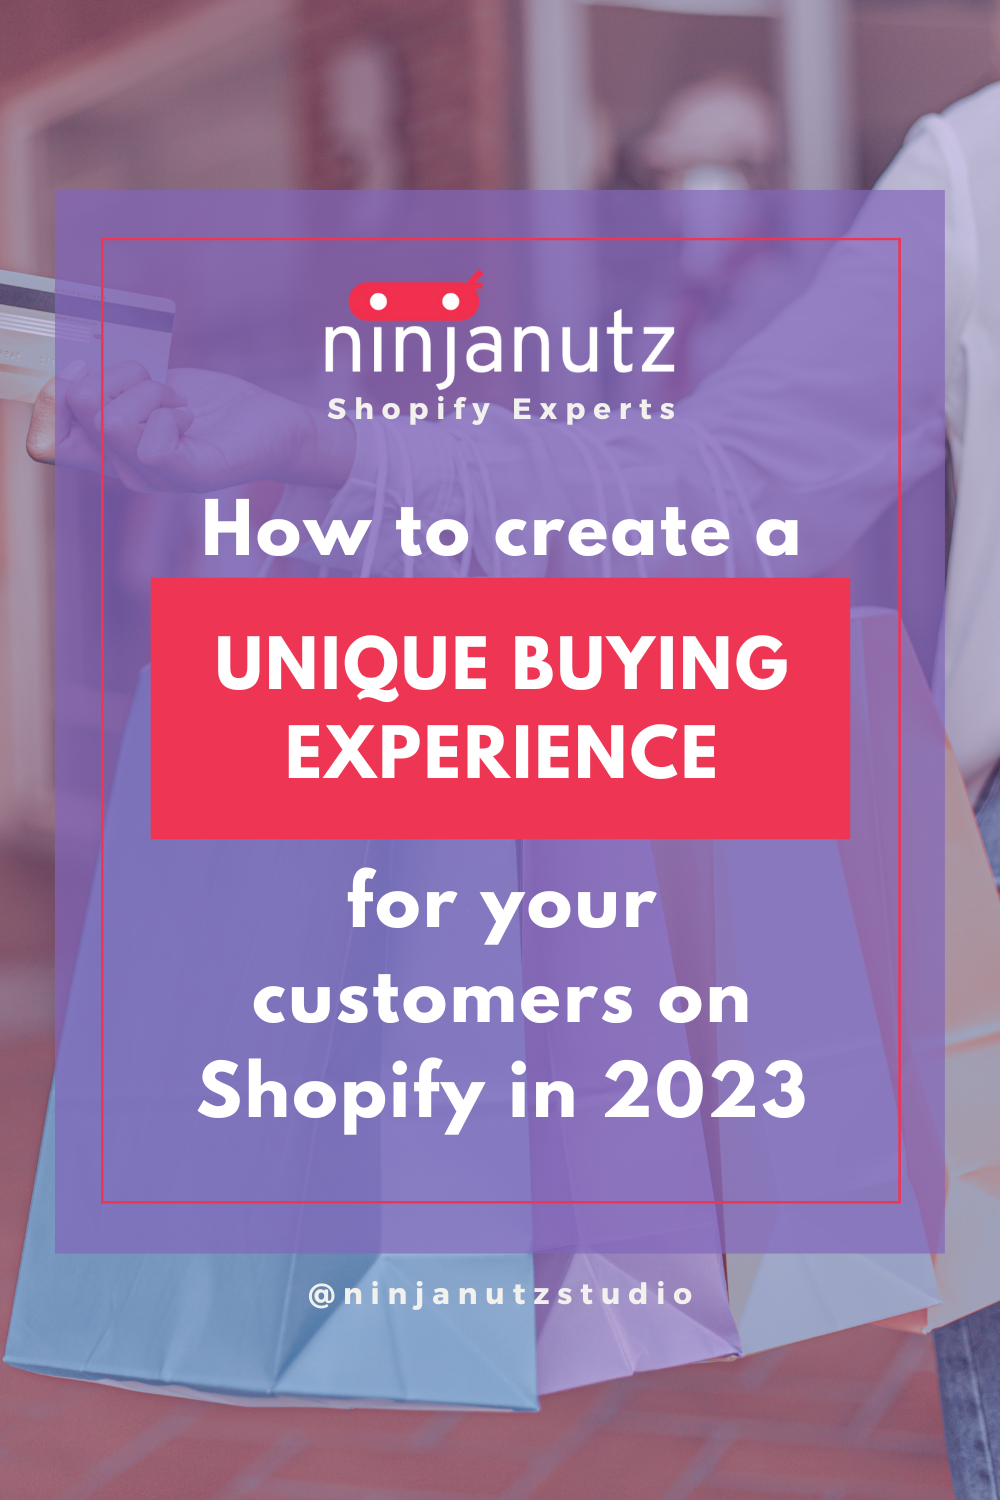 How to create a unique buying experience for your customers on Shopify in 2023 NinjaNutz®